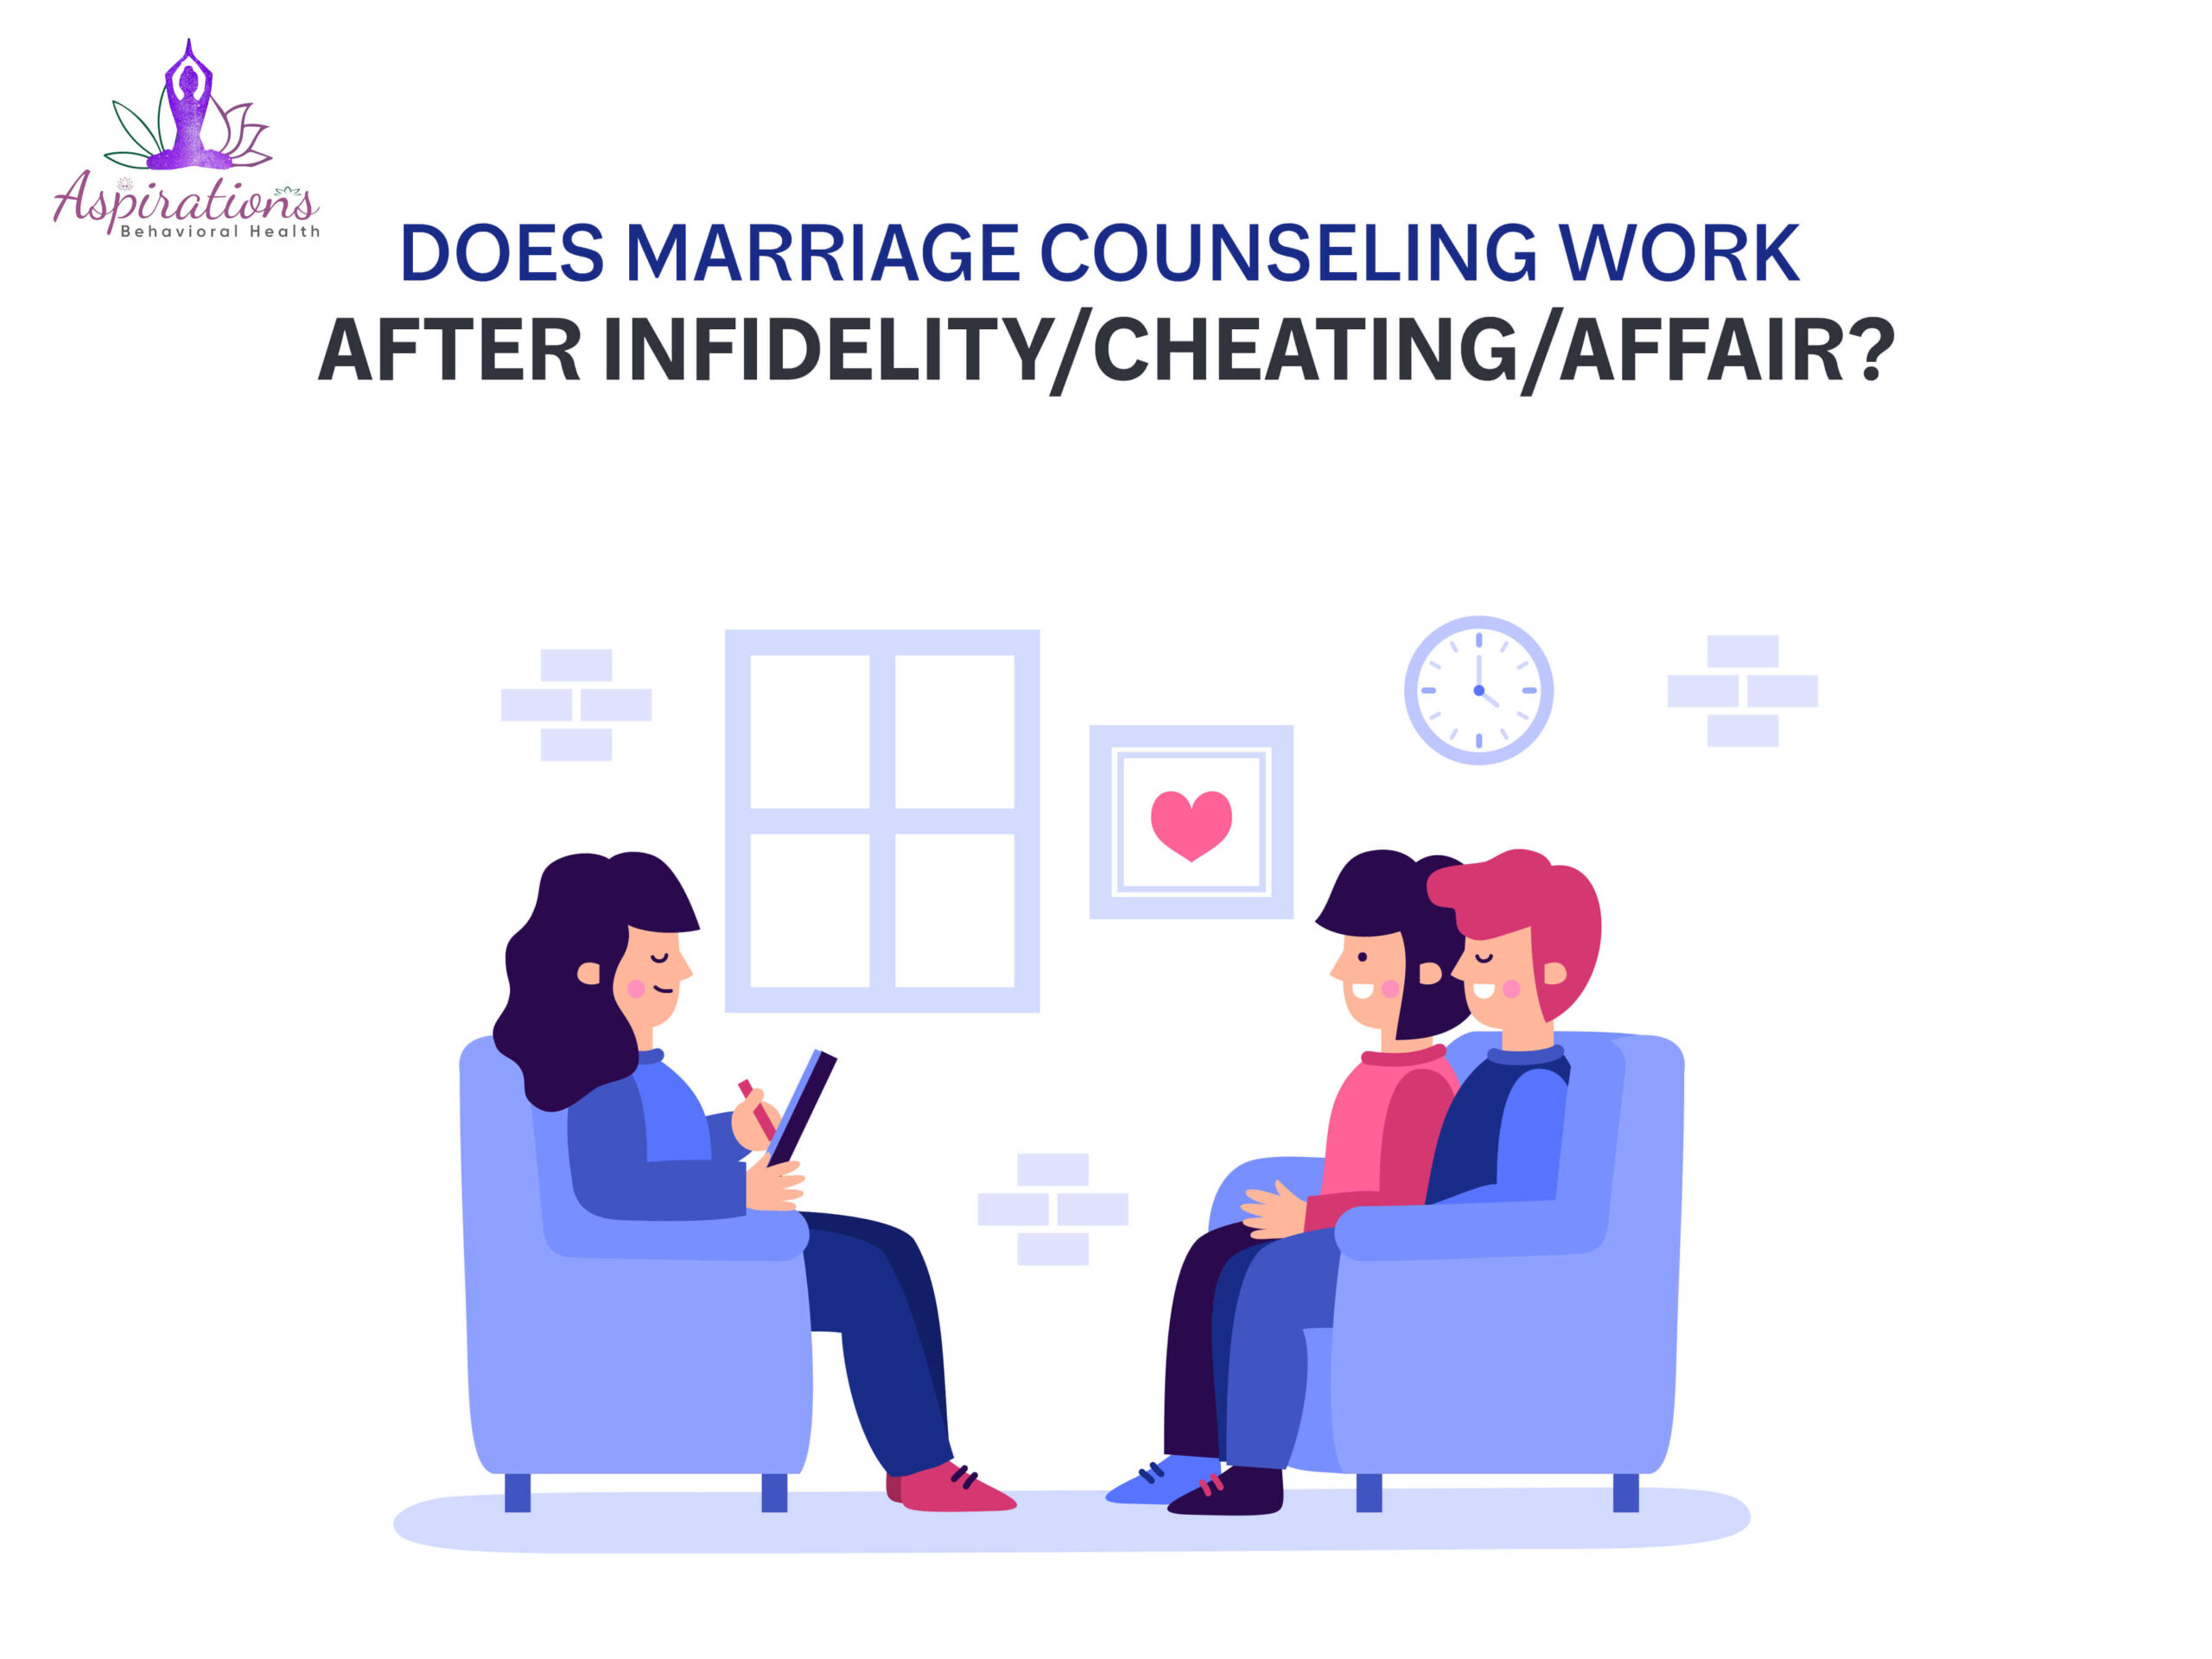 Does Marriage Counseling Work After Infidelity/Cheating/Affair?